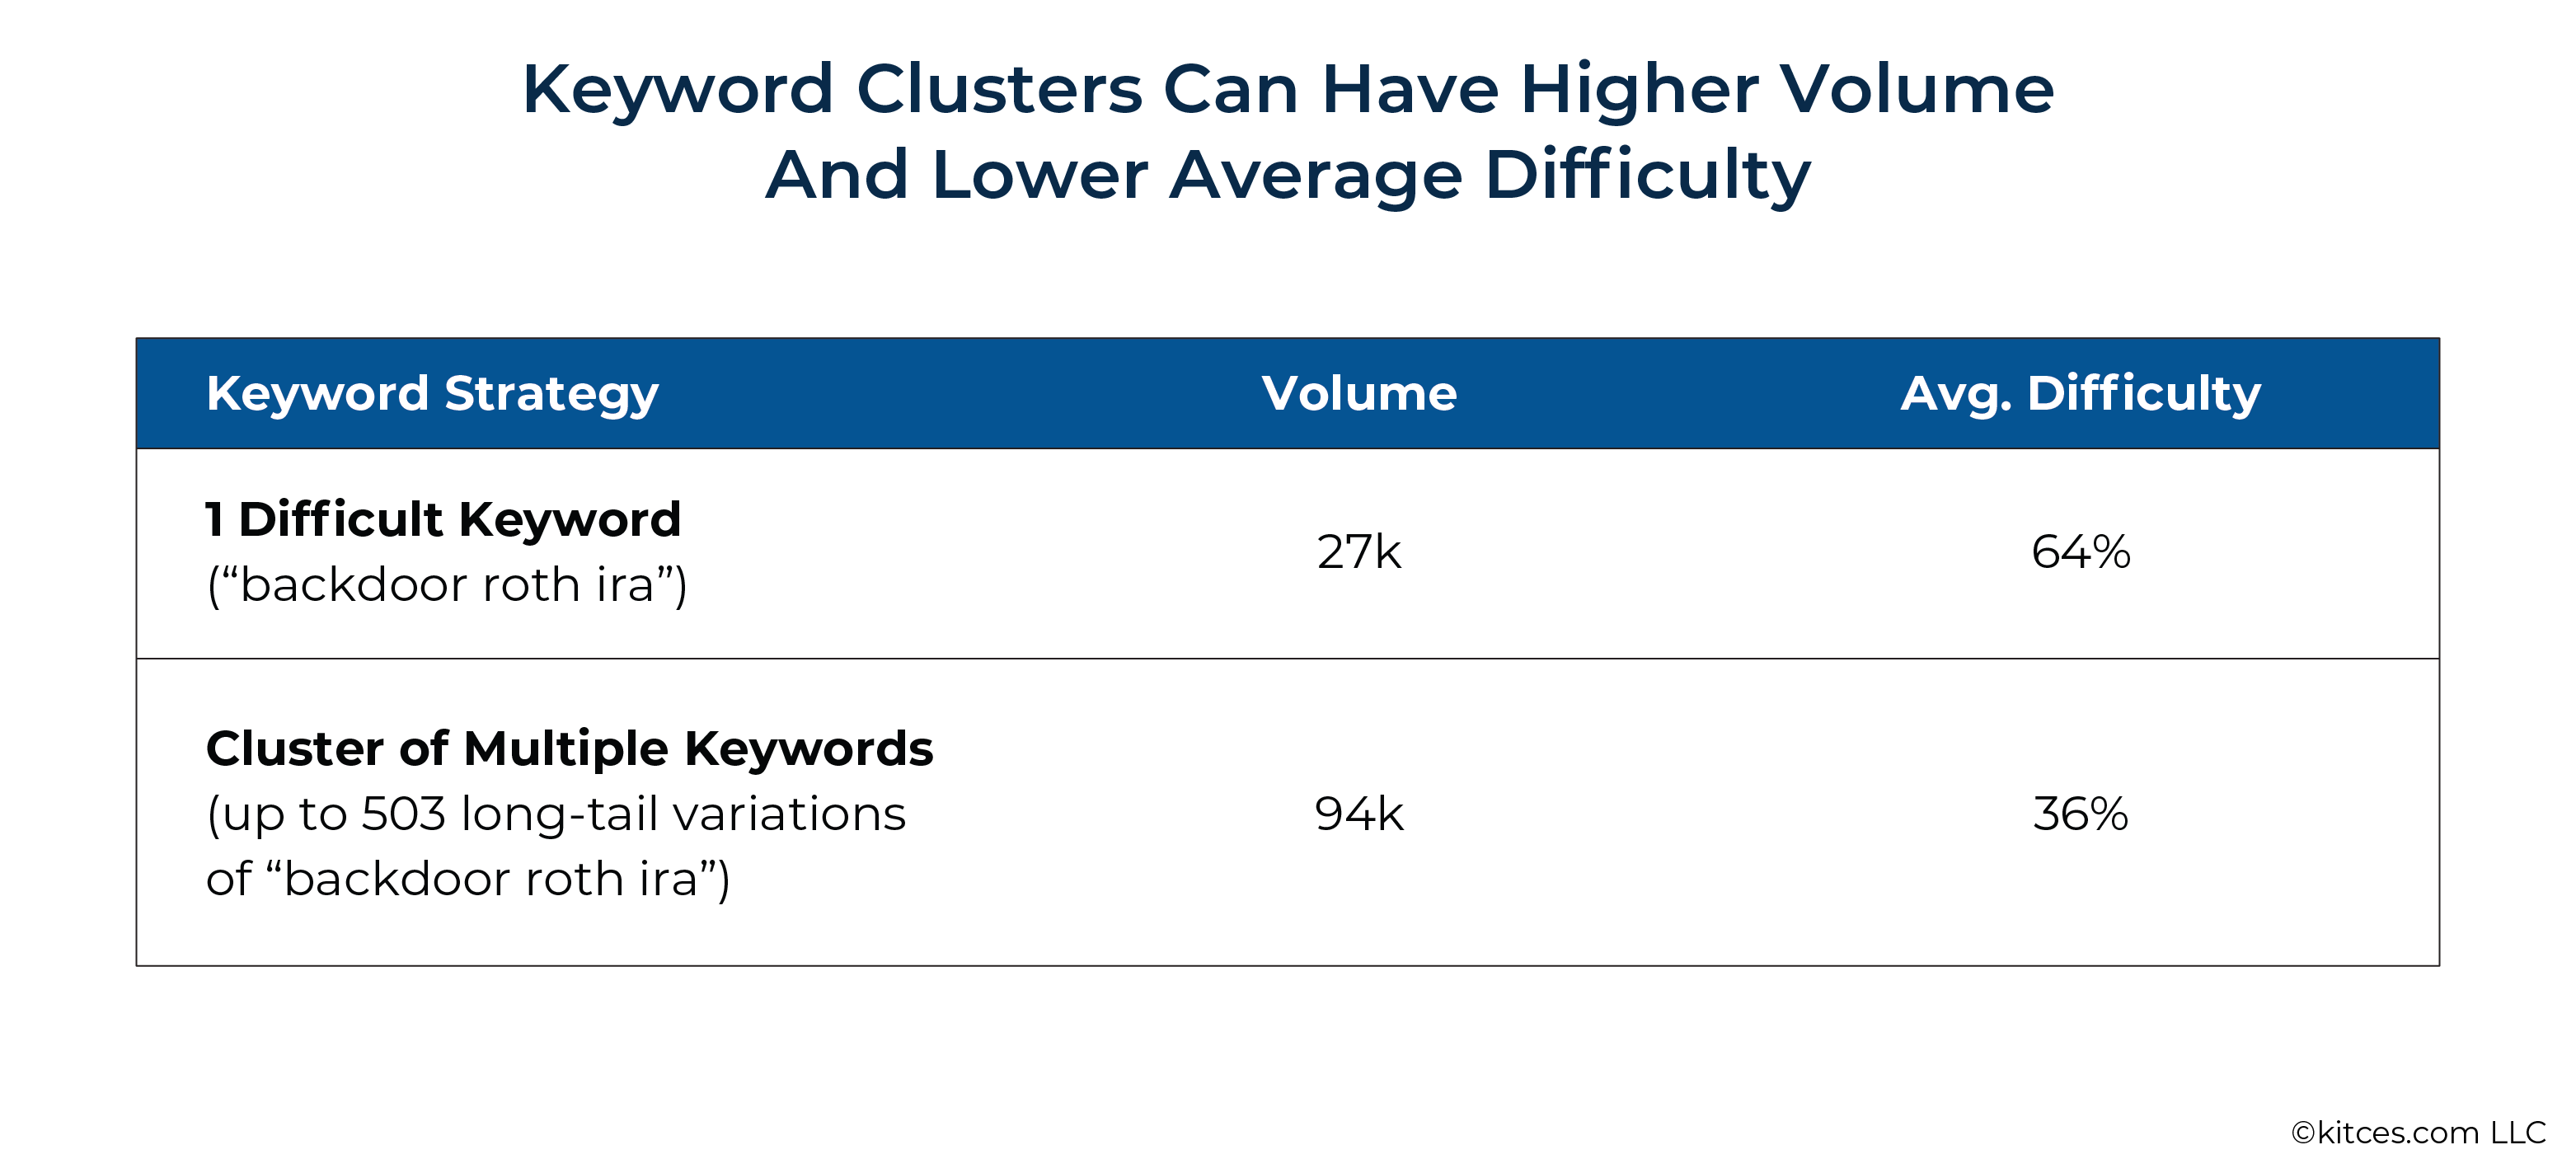 Keyword Clusters Can Have Higher Volume And Lower Average Difficulty